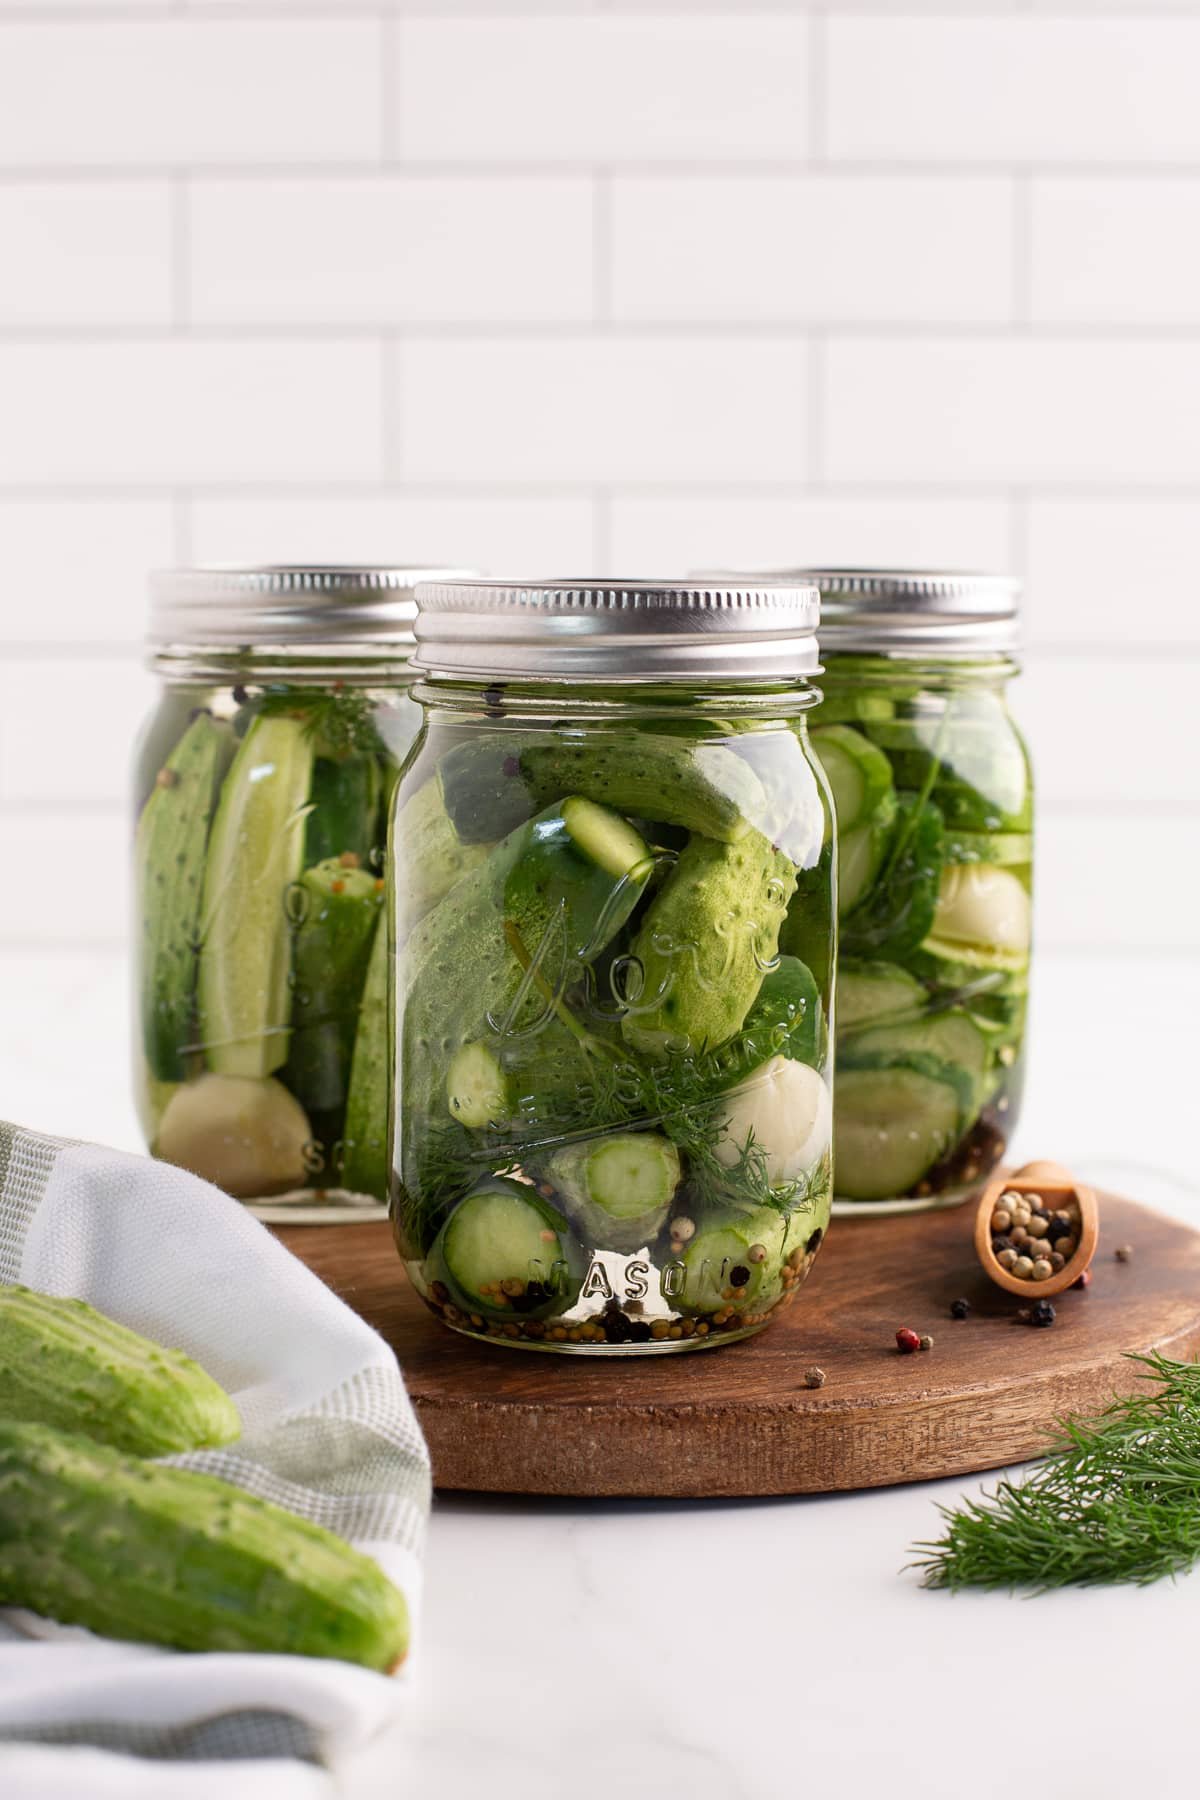 3 jars of dill pickles on a wood cutting board.